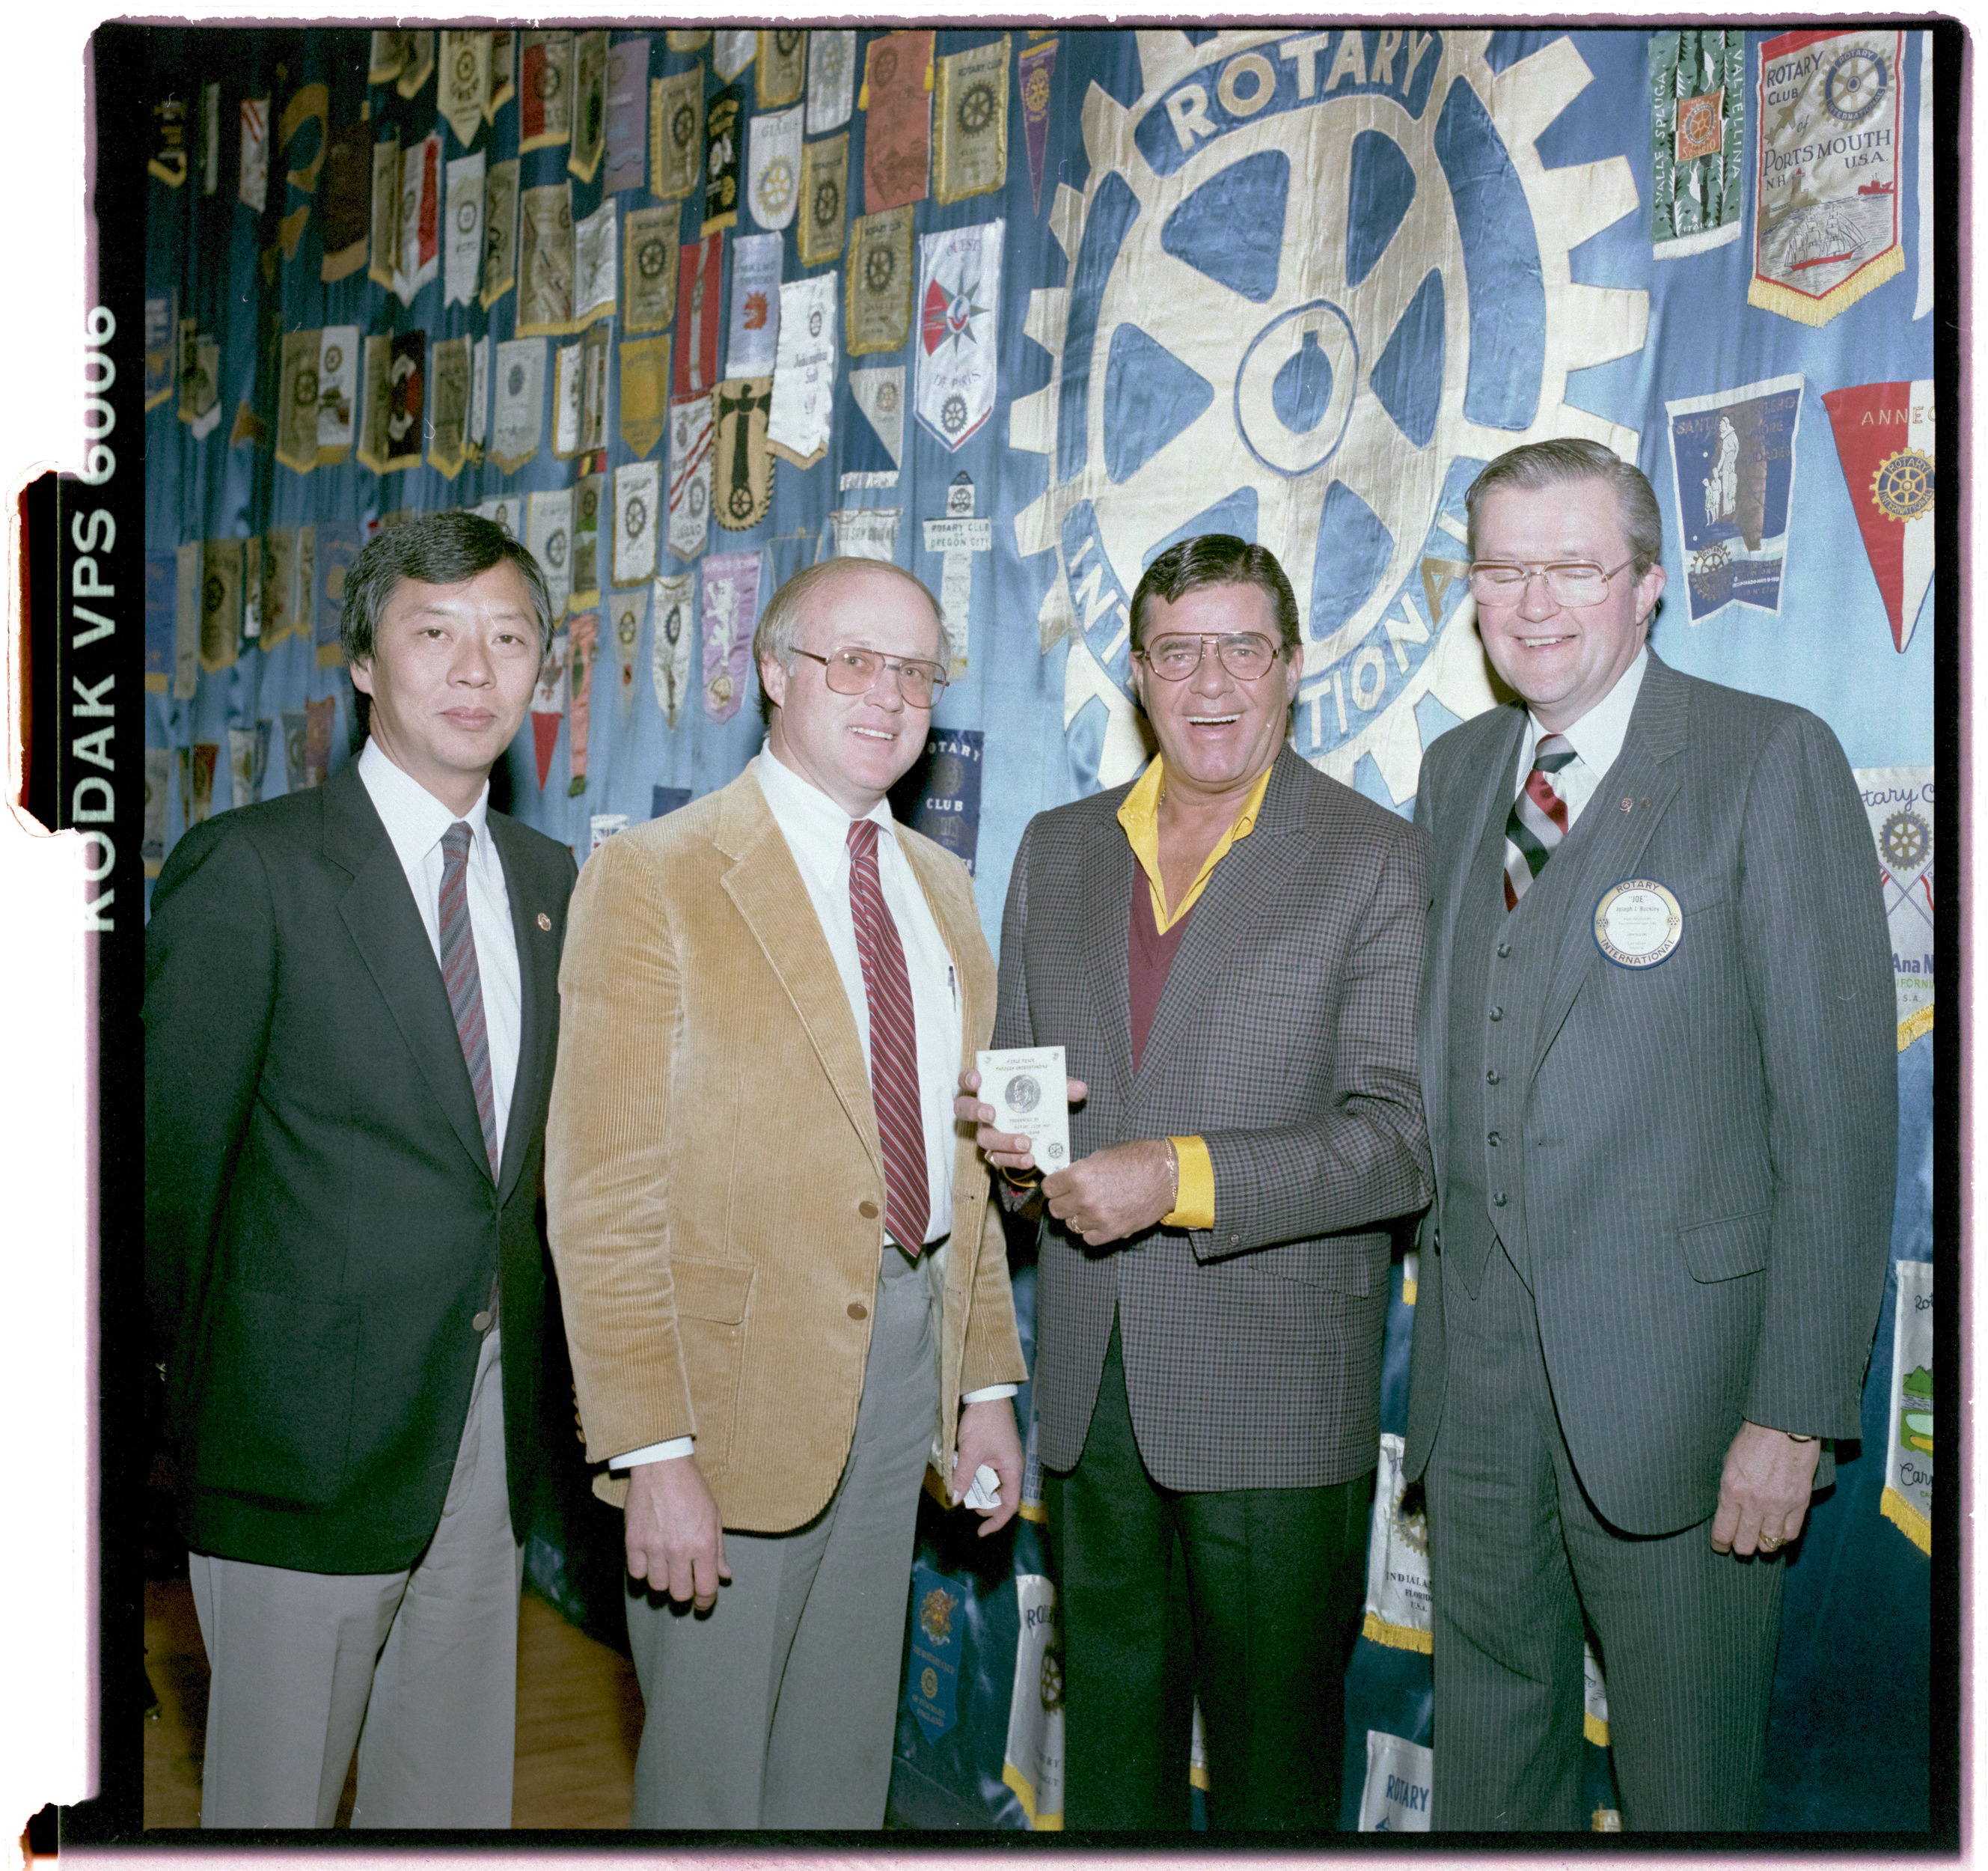 Photographs of Las Vegas Rotary Jerry Lewis, image 01